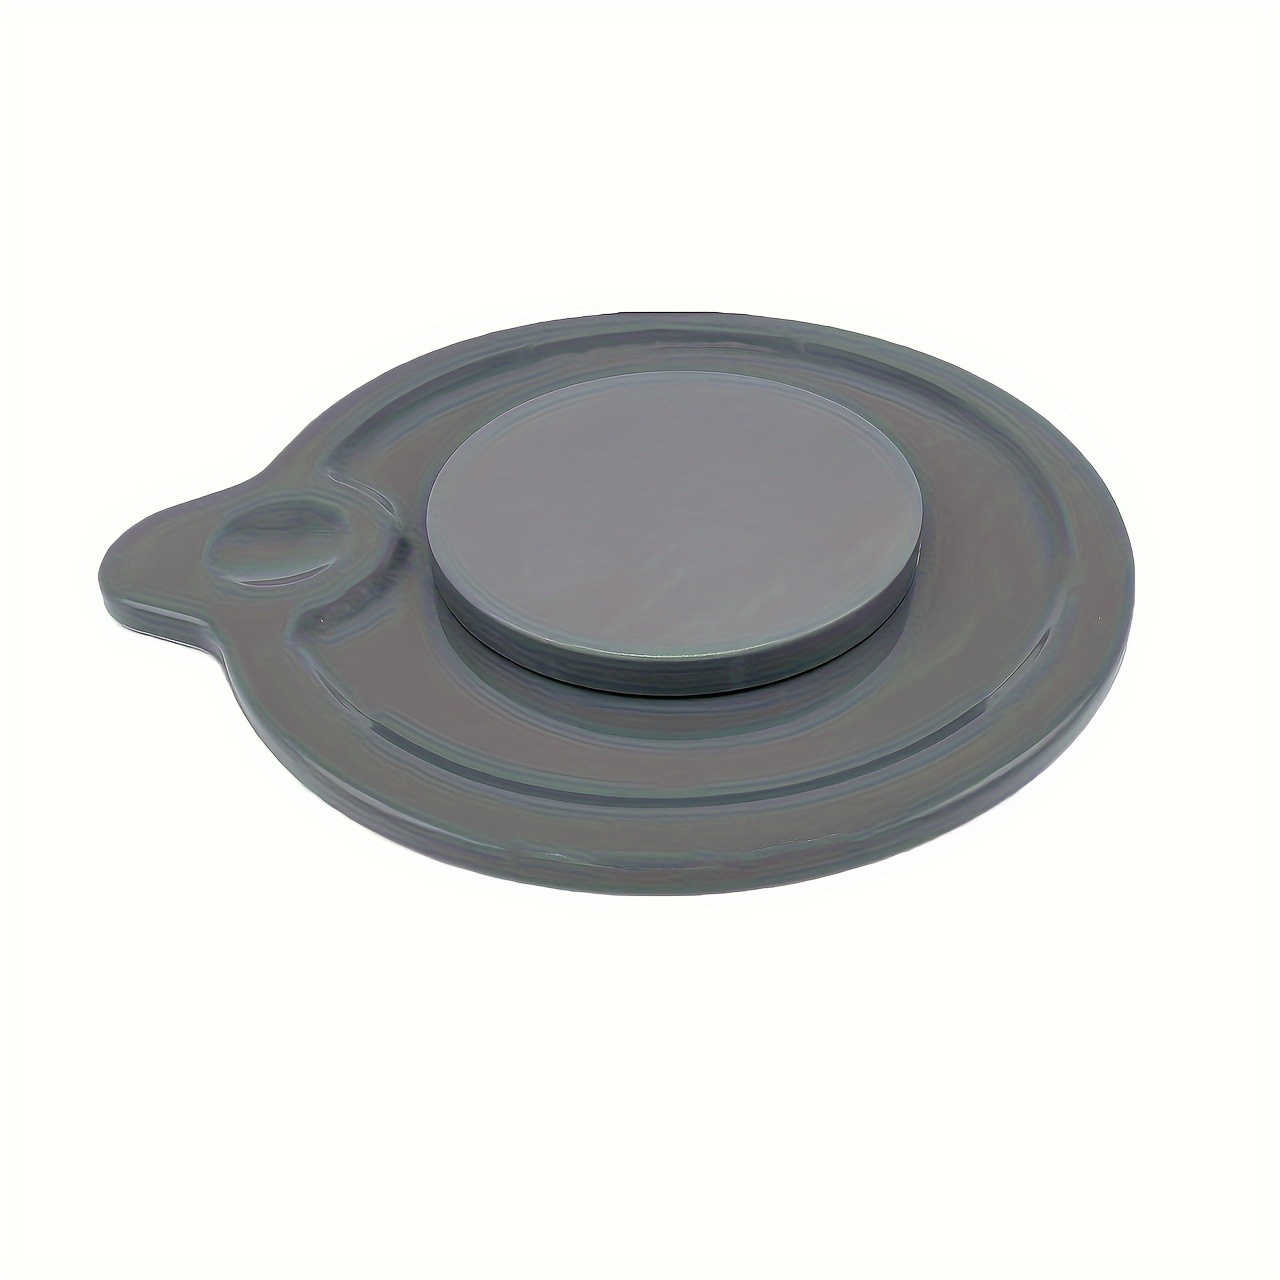 Mixer Bowl Cover For Kitchenaid 4.5-5 Quart Tilt-head Stand Mixer, Splash  Guard With Add Ingredient Opening, Glass Bowl Lid To Prevent Ingredient  Spills, Open Hole Design In The Middle, Ap5801837, Ps8759593, W10559999 